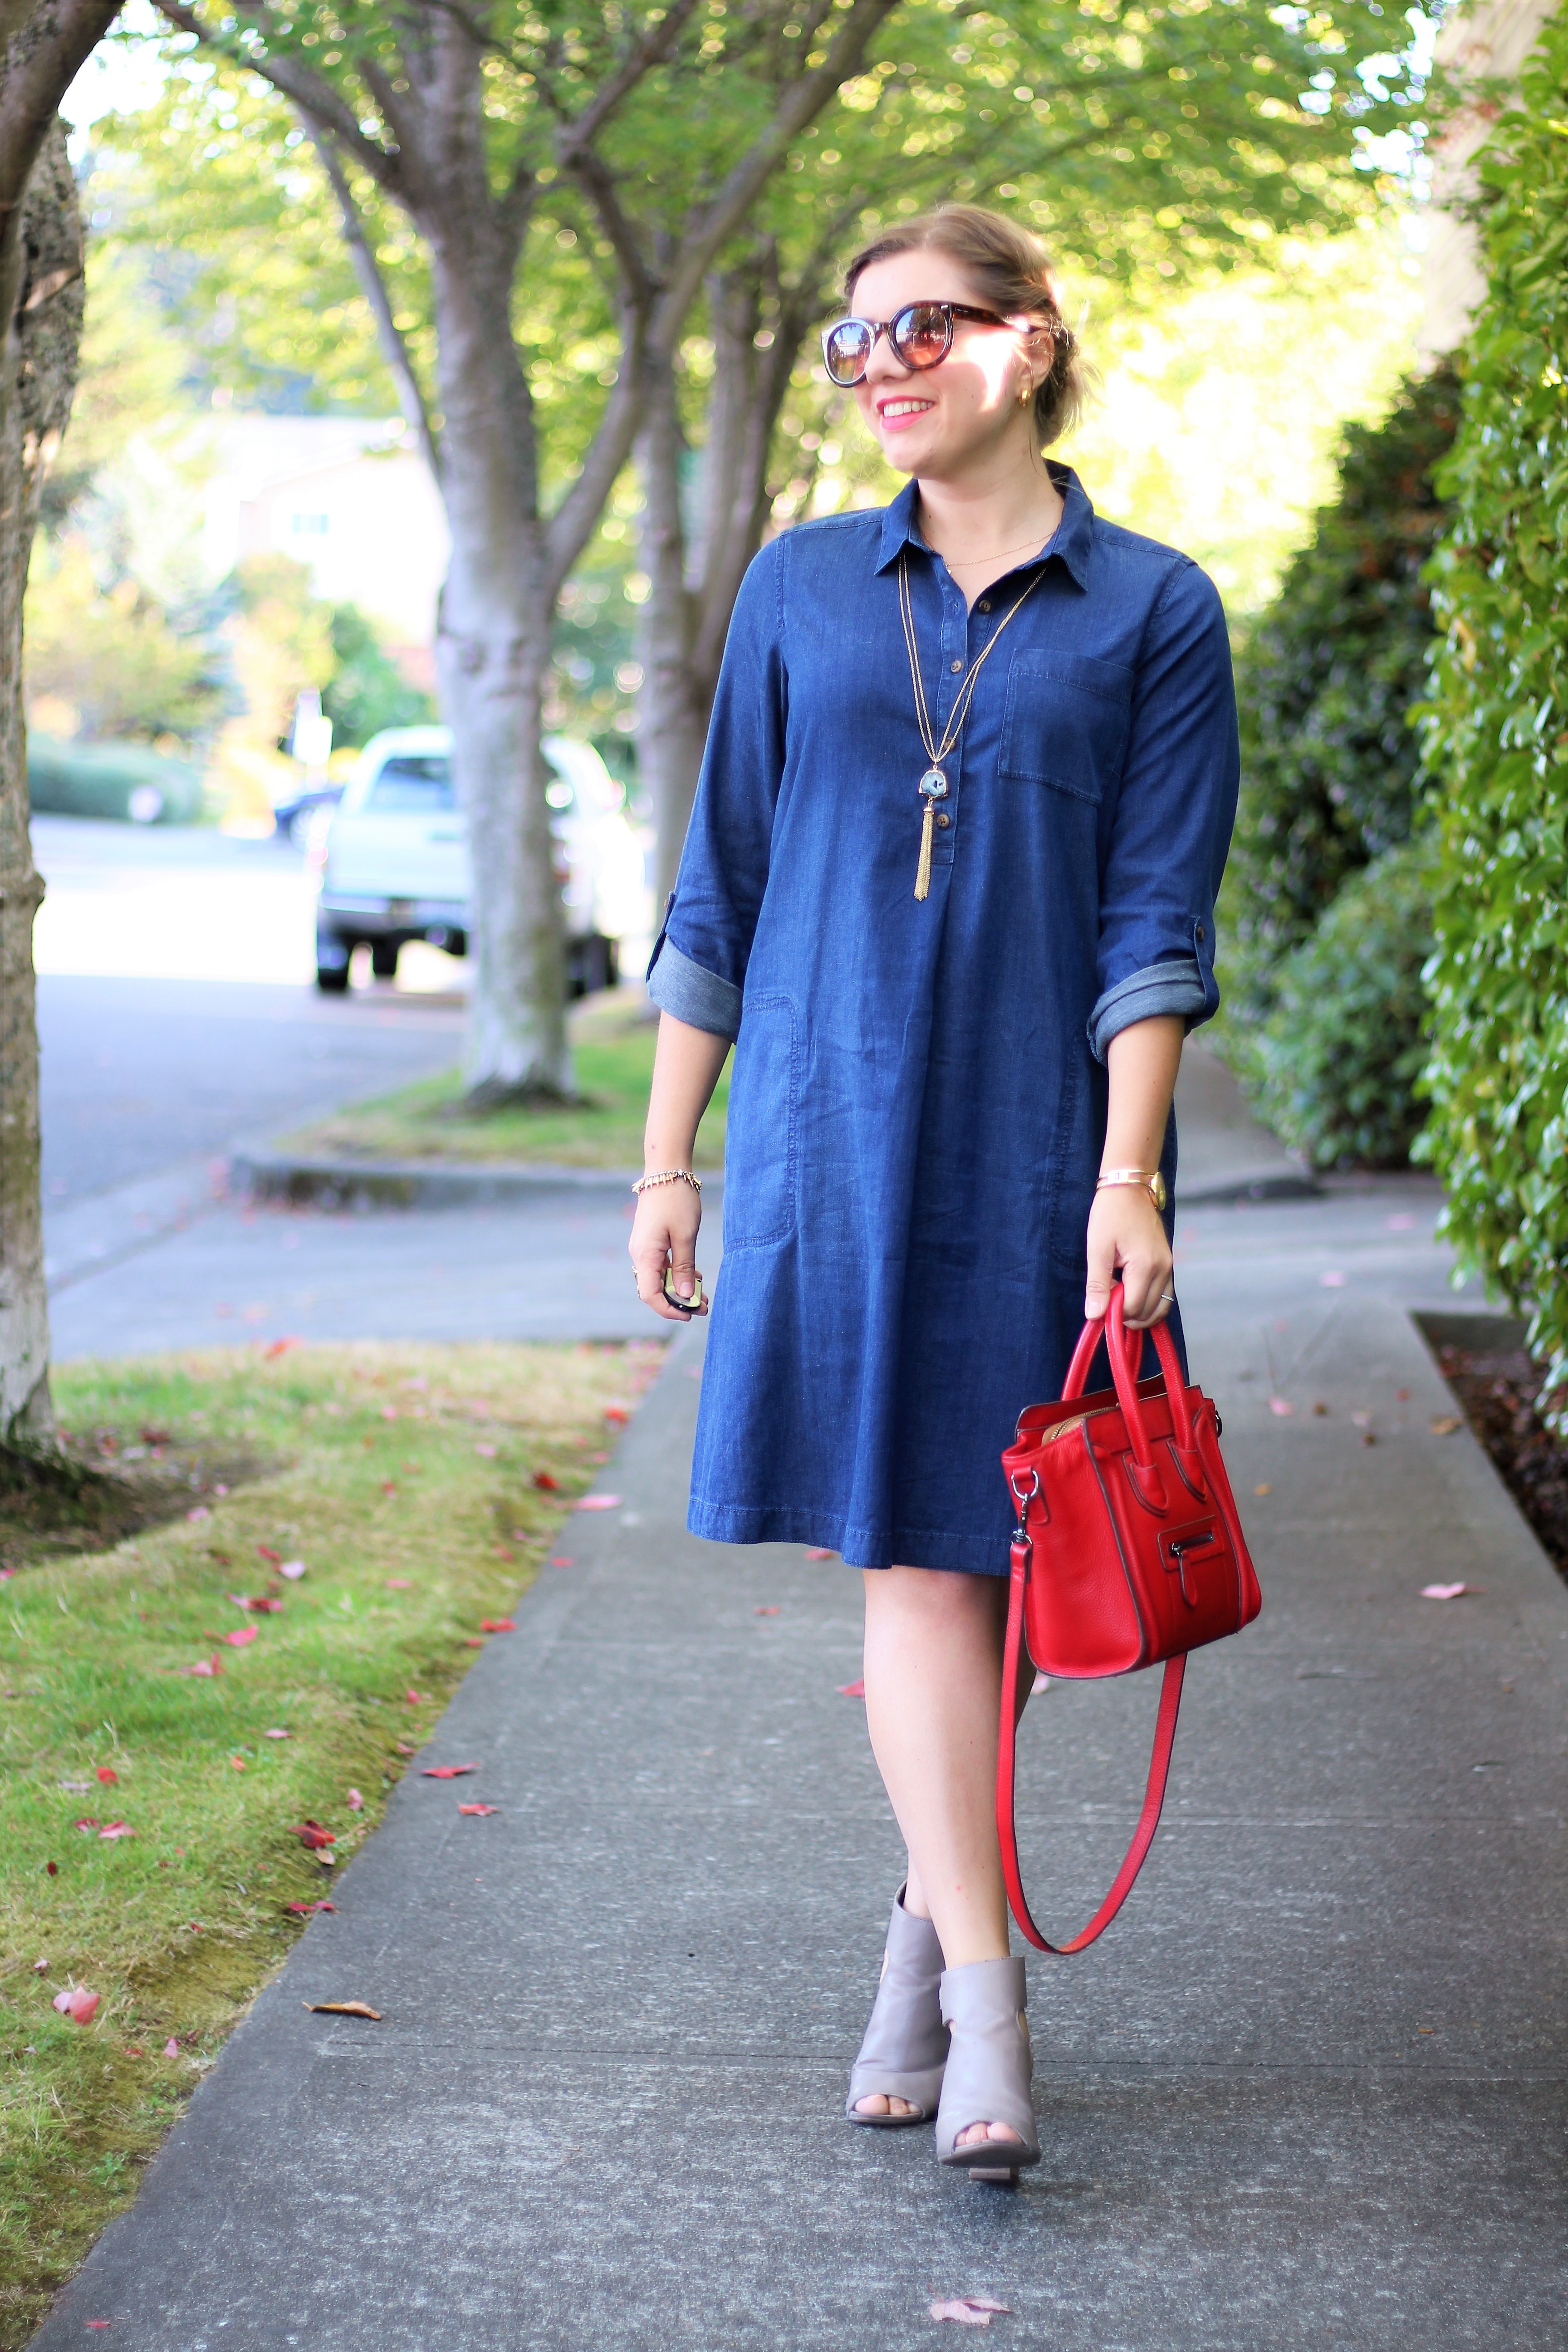 Today's Everyday Fashion: The Chambray Dress — J's Everyday Fashion